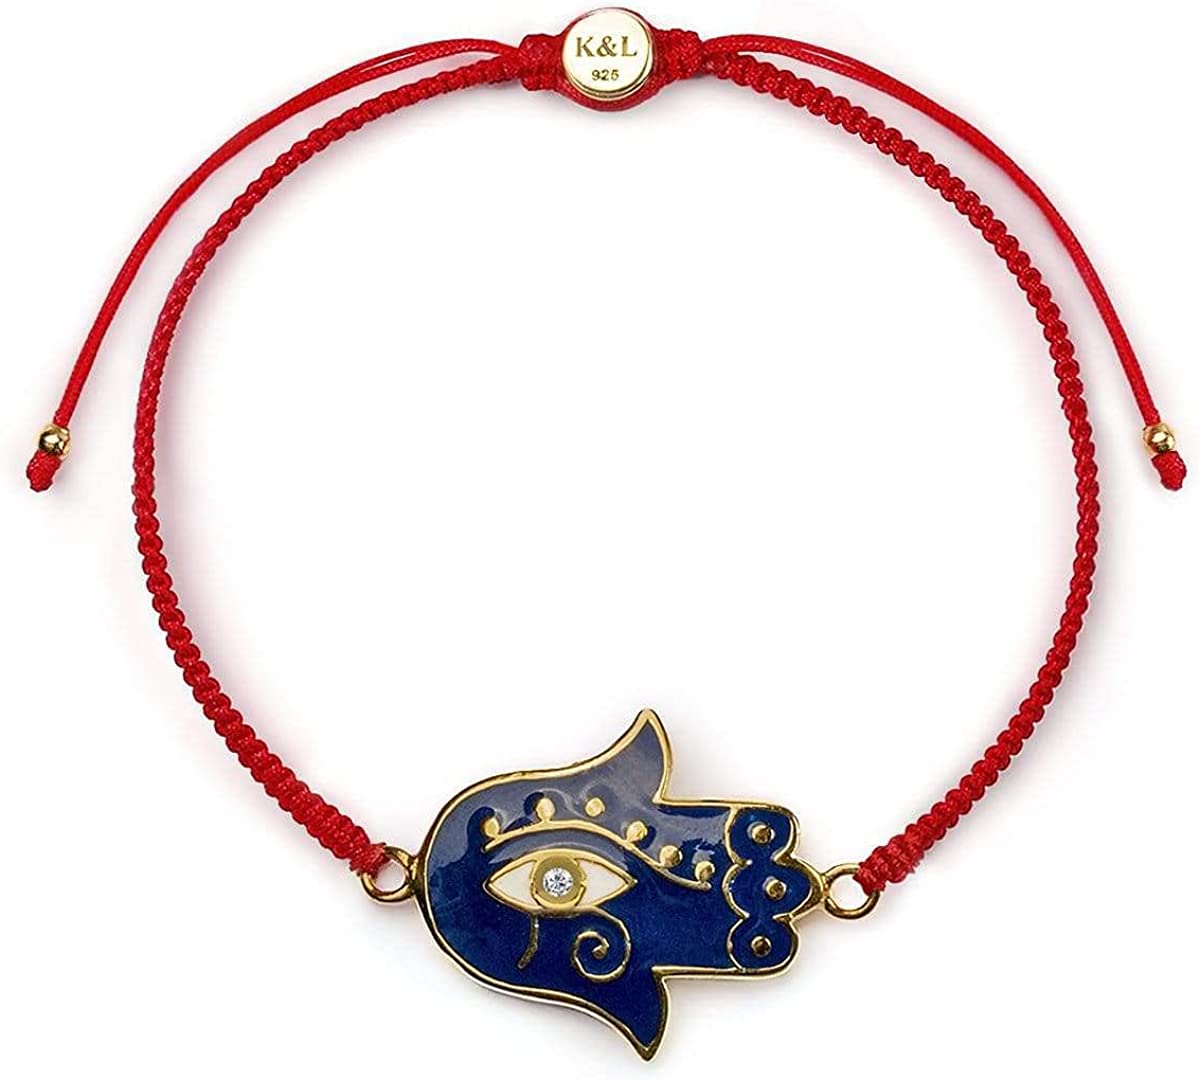 Karma and Luck - Healing Strength - Women's 18K Gold Plated Brass Eye of Horus Charm Red String Adjustable Drawstring Closure Bracelet Handmade with Love in Bali